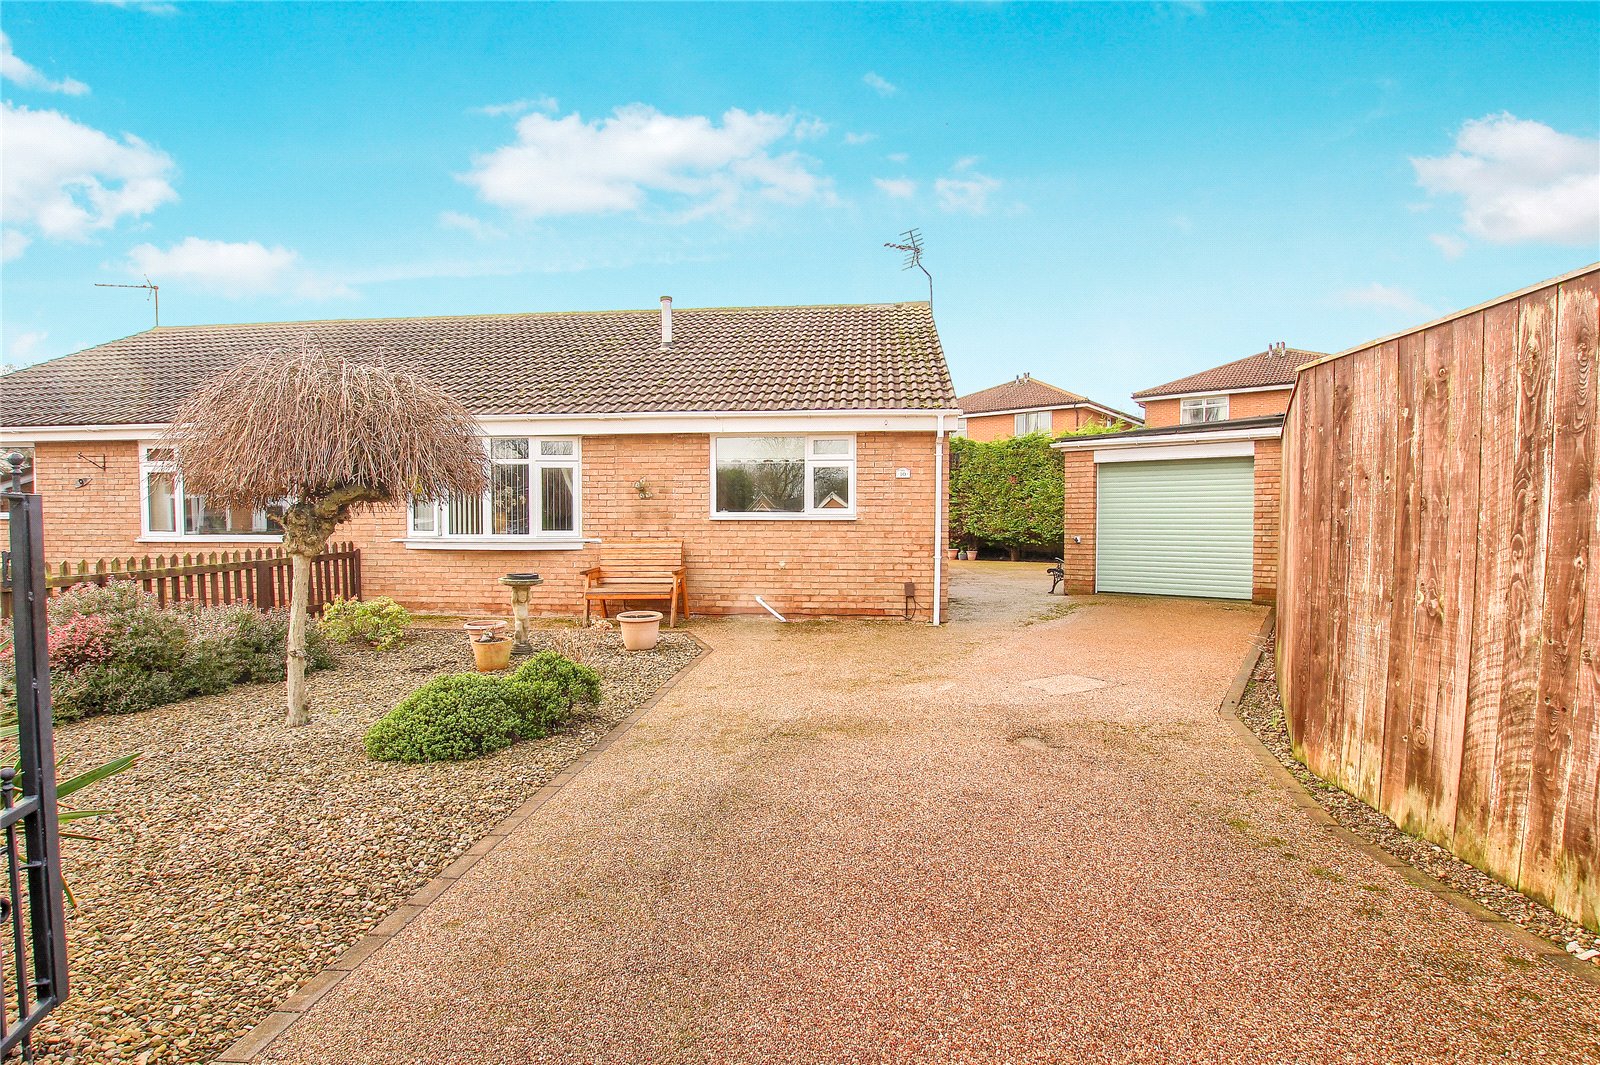 2 bed bungalow for sale in Bede Close, Stockton-on-Tees  - Property Image 1